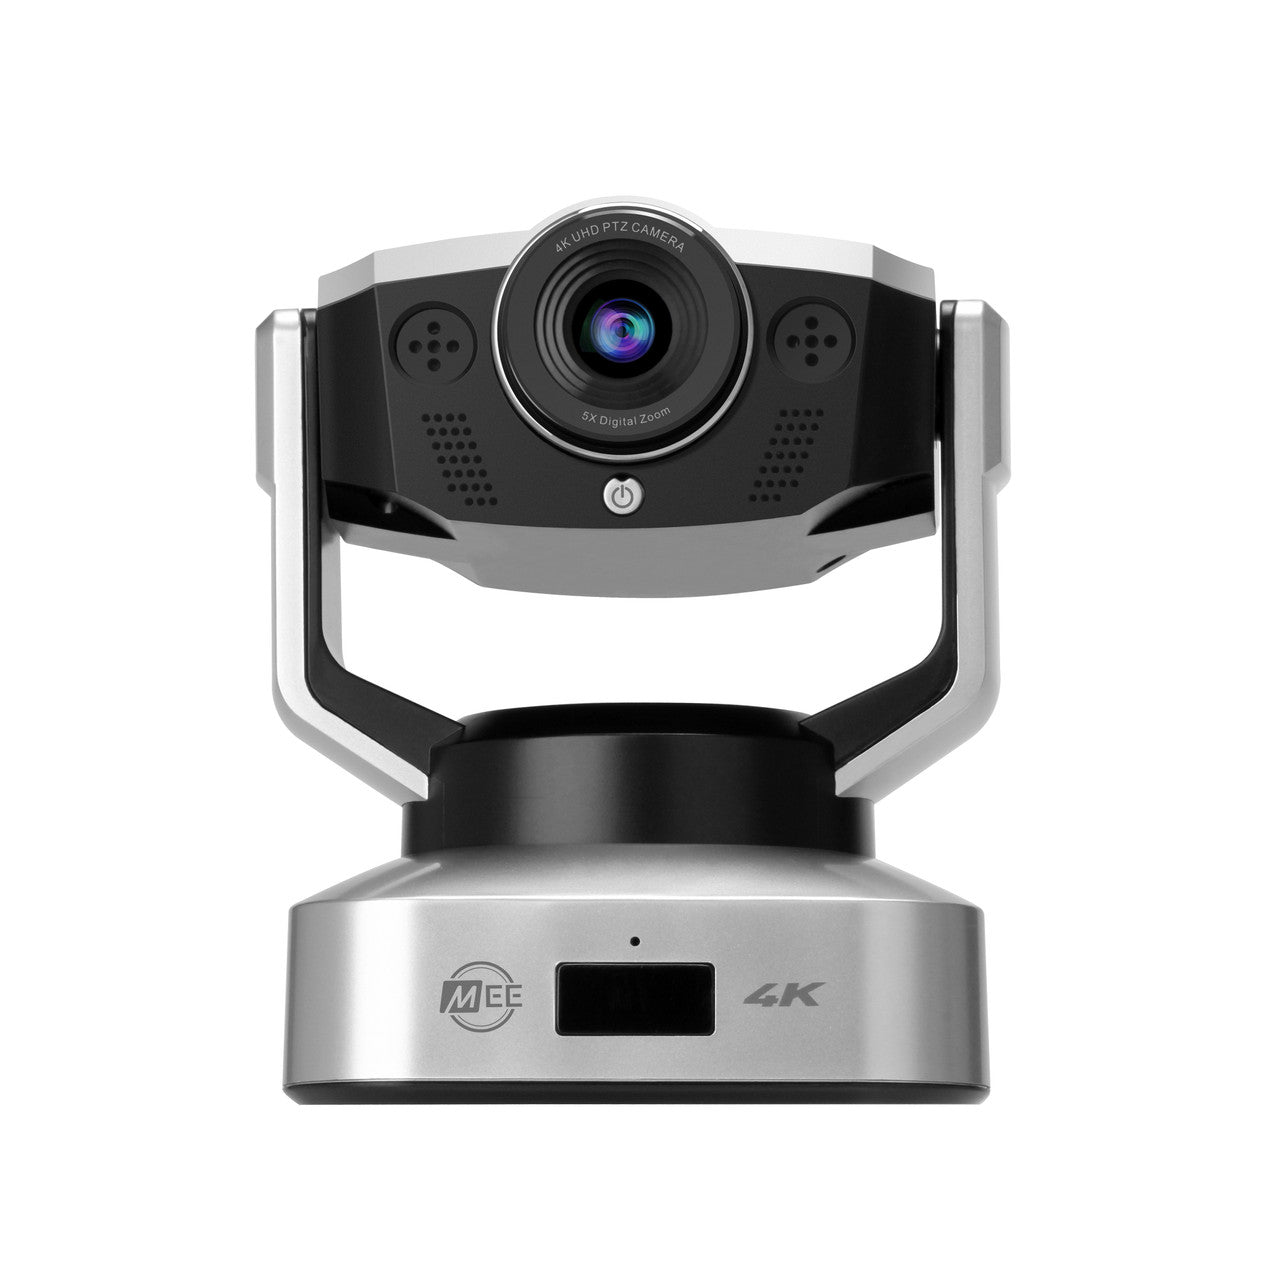 Image of C20PTZ 4K Ultra HD Pan-Tilt-Zoom Camera with Remote.